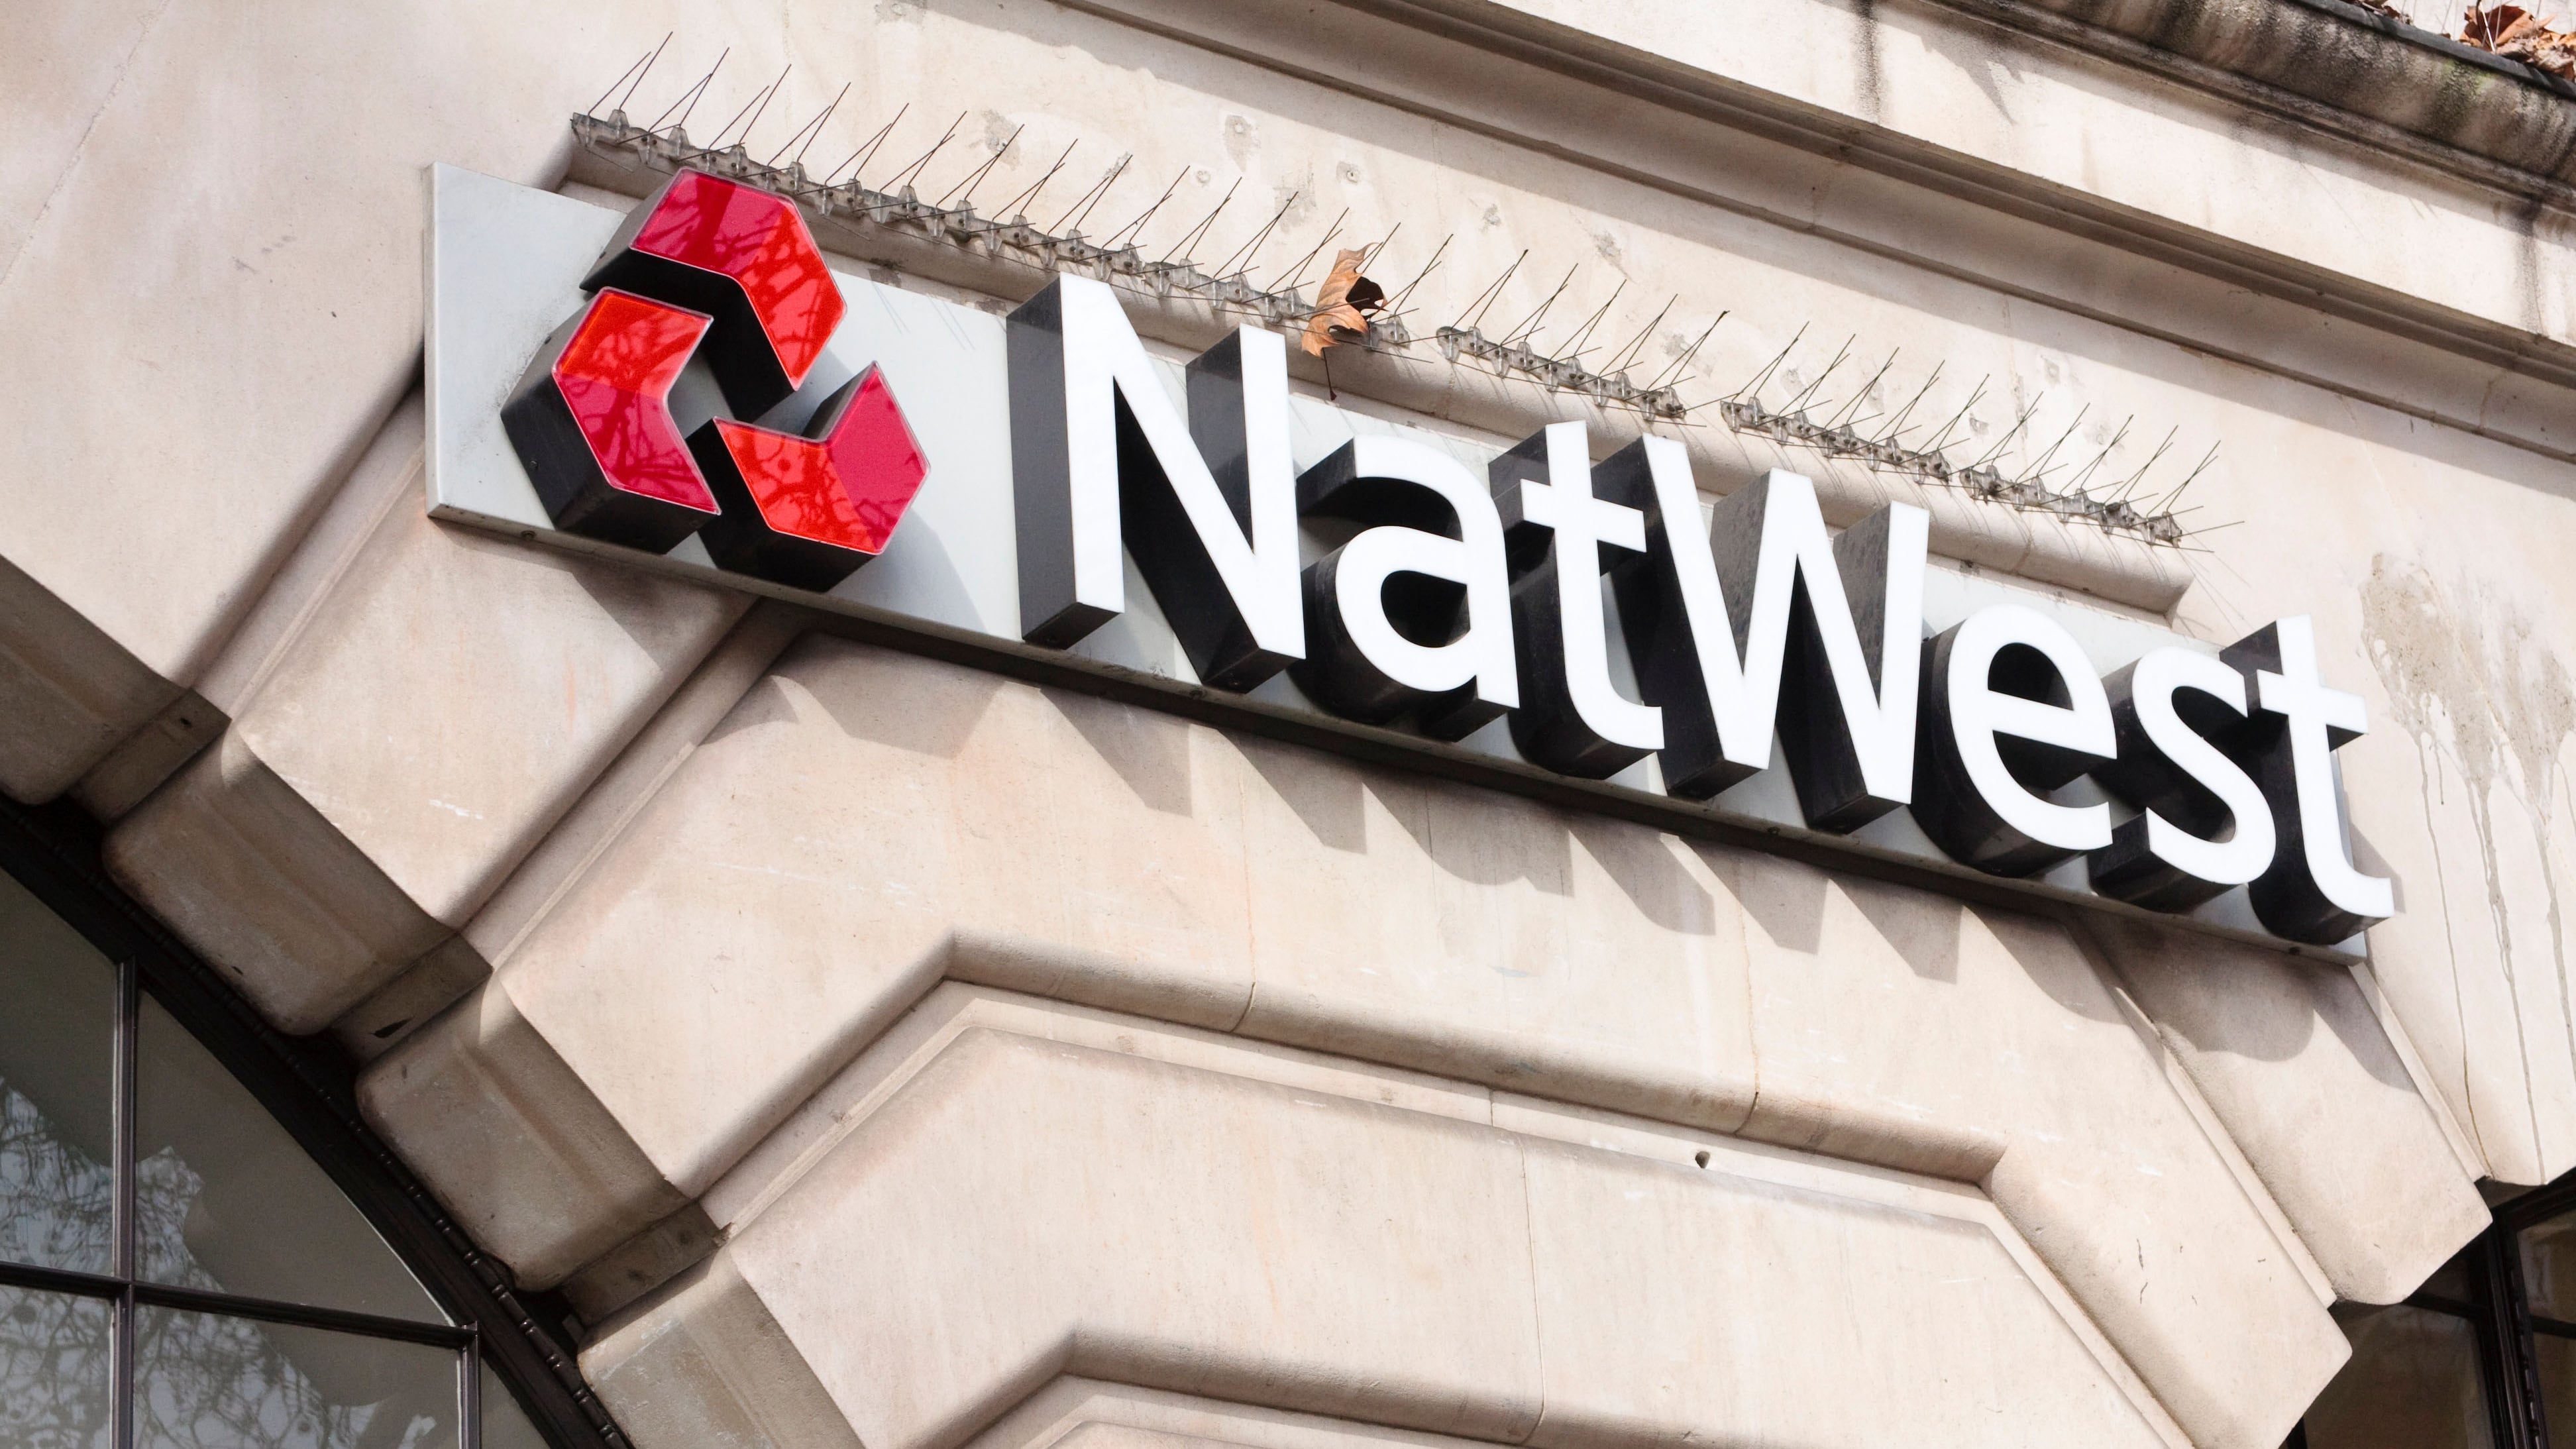 NatWest has apologised to customers after its online and mobile banking services suffered outages on Tuesday morning